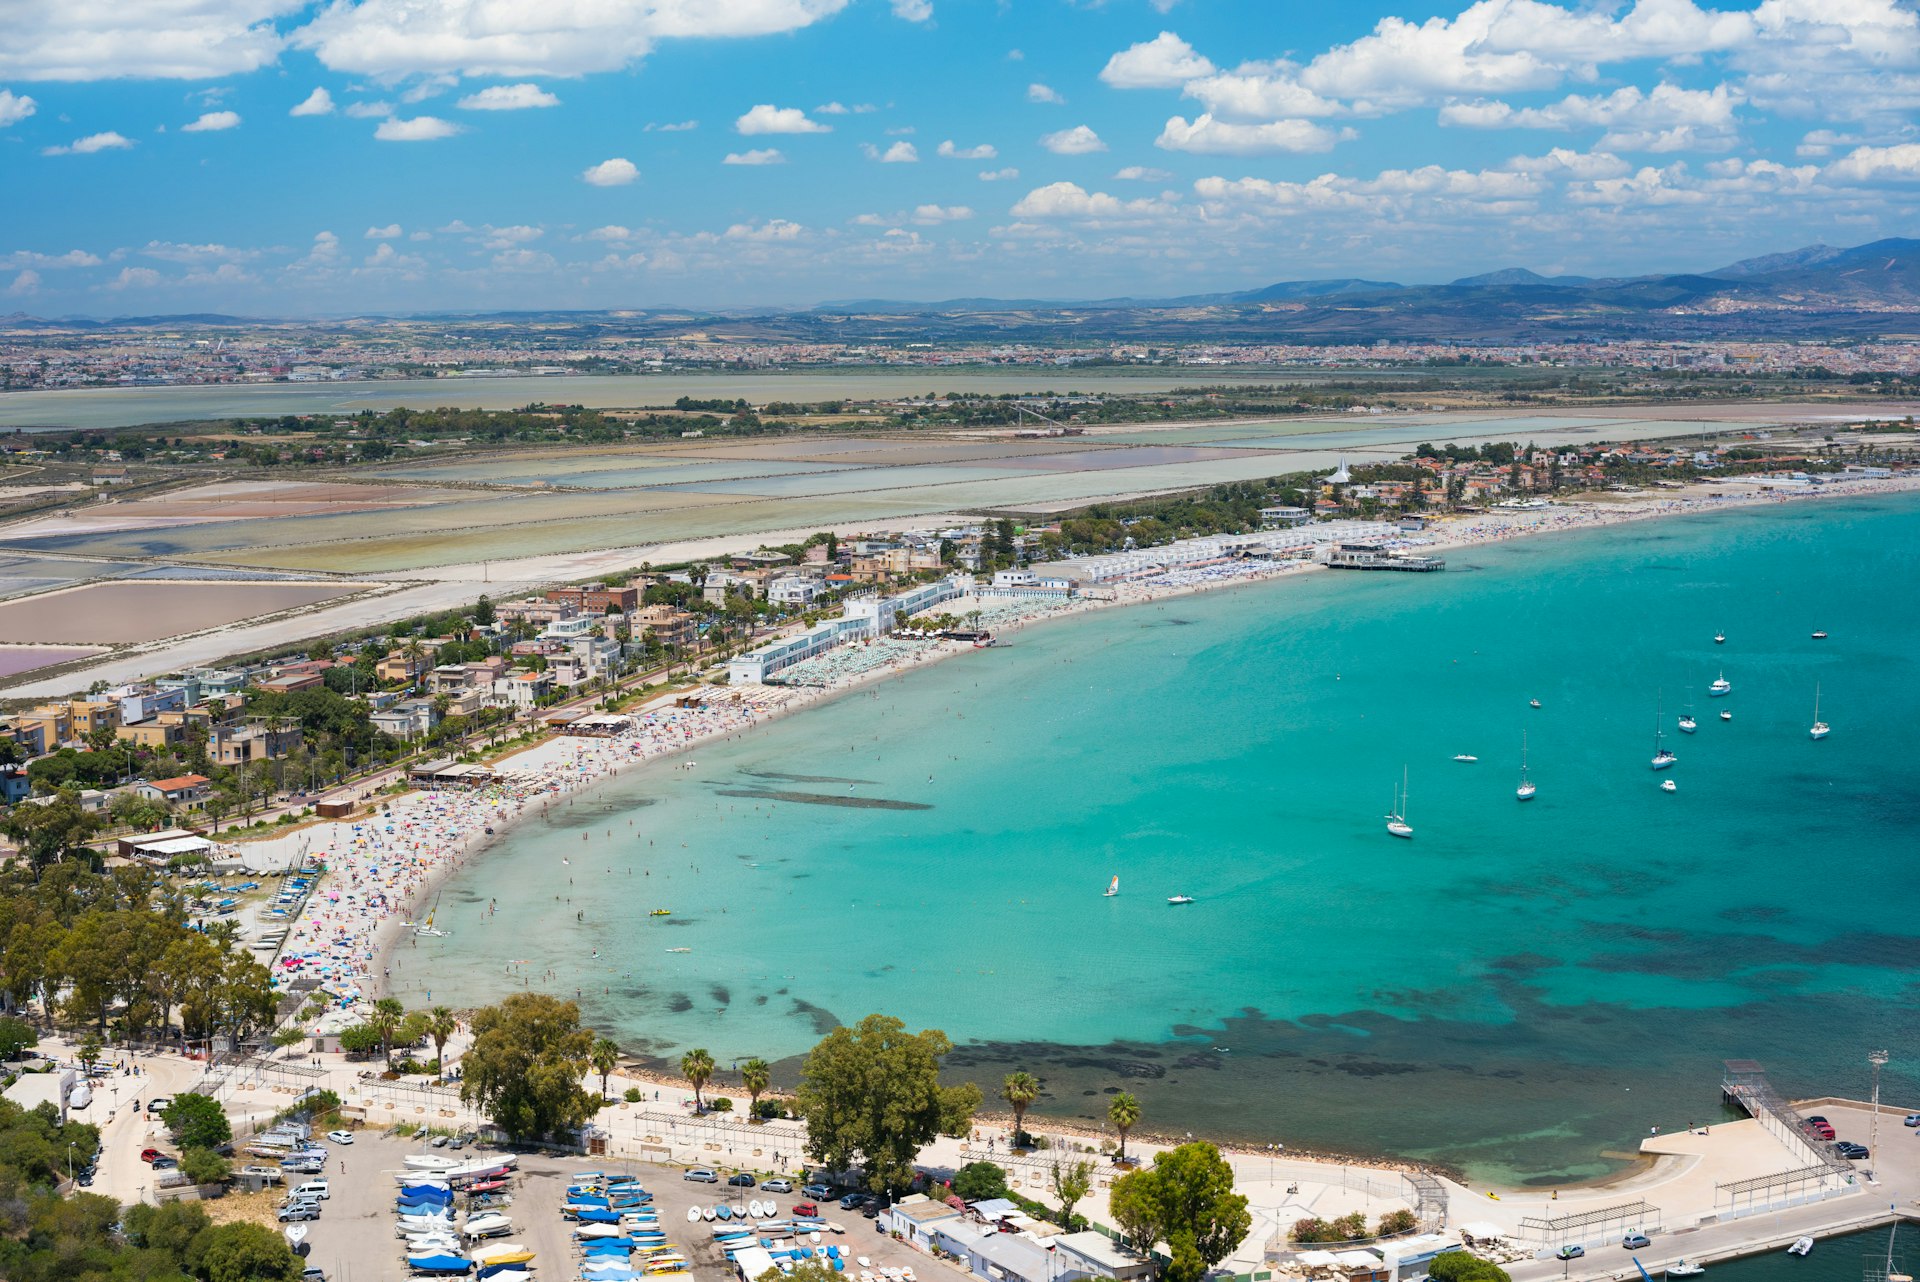 A very high-angled view of Poetto Beach, a very large sandy bay with clear blue water. The beach has many people sunbathing on it.